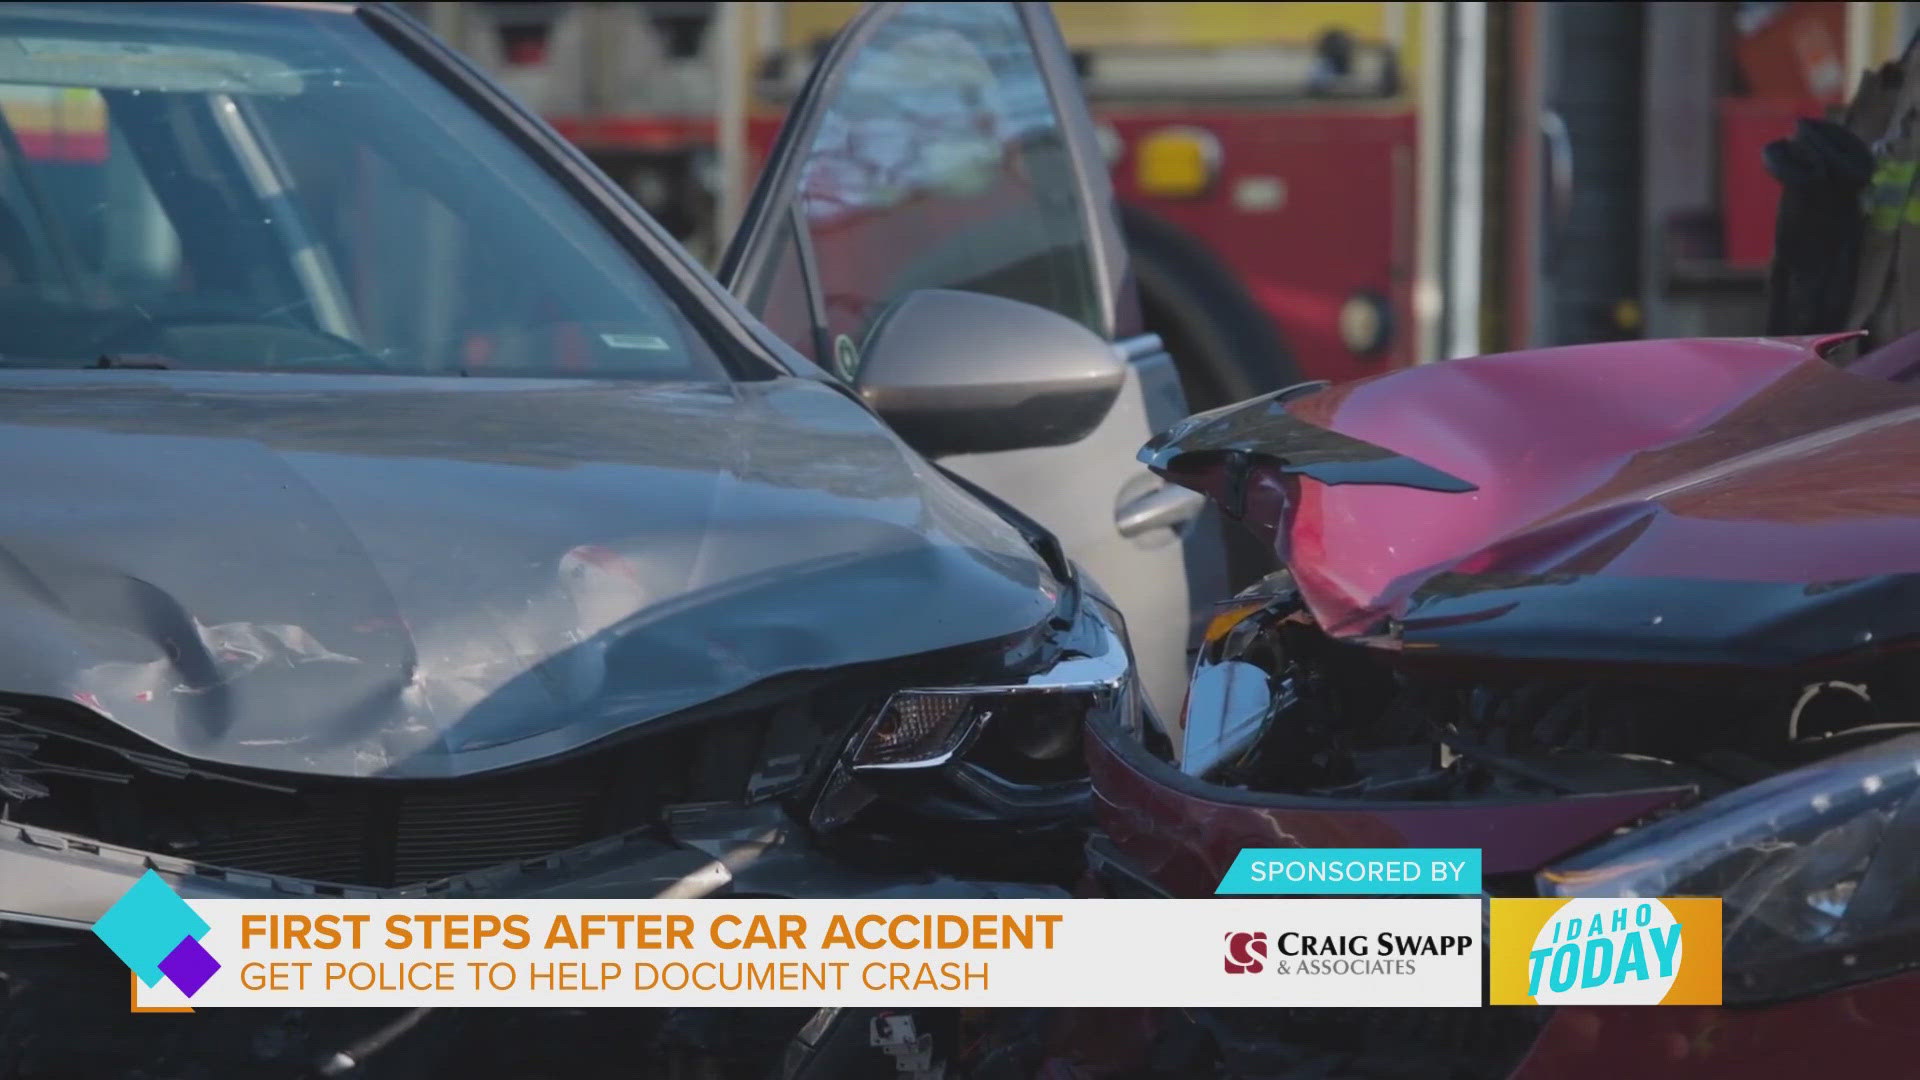 Craig Swapp gives advice on how to handle a car accident.